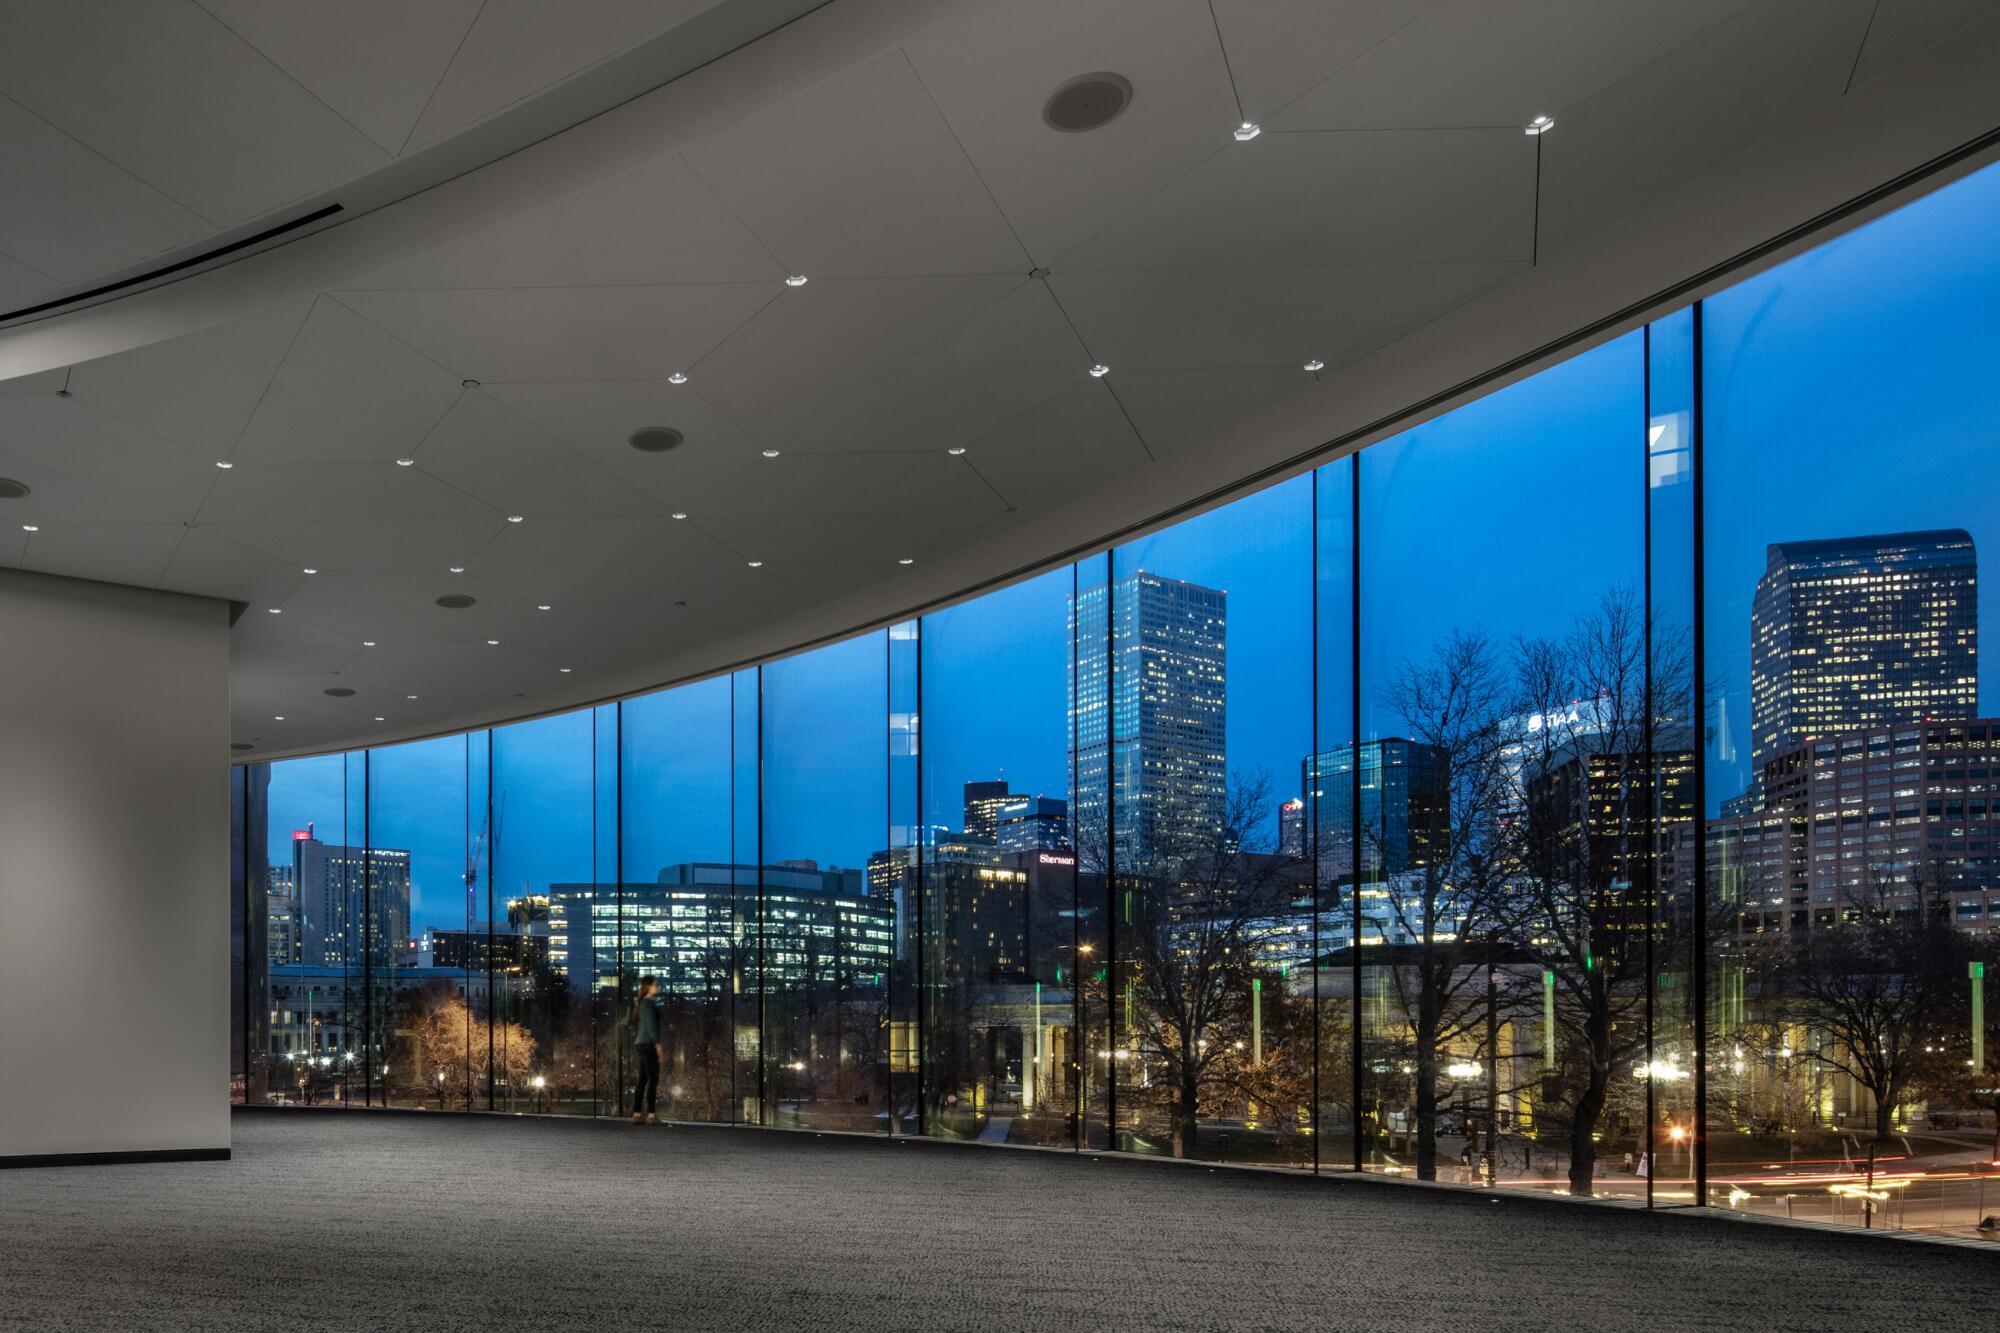 The Denver skyline is seen through a series of floor-to-ceiling windows in the early evening